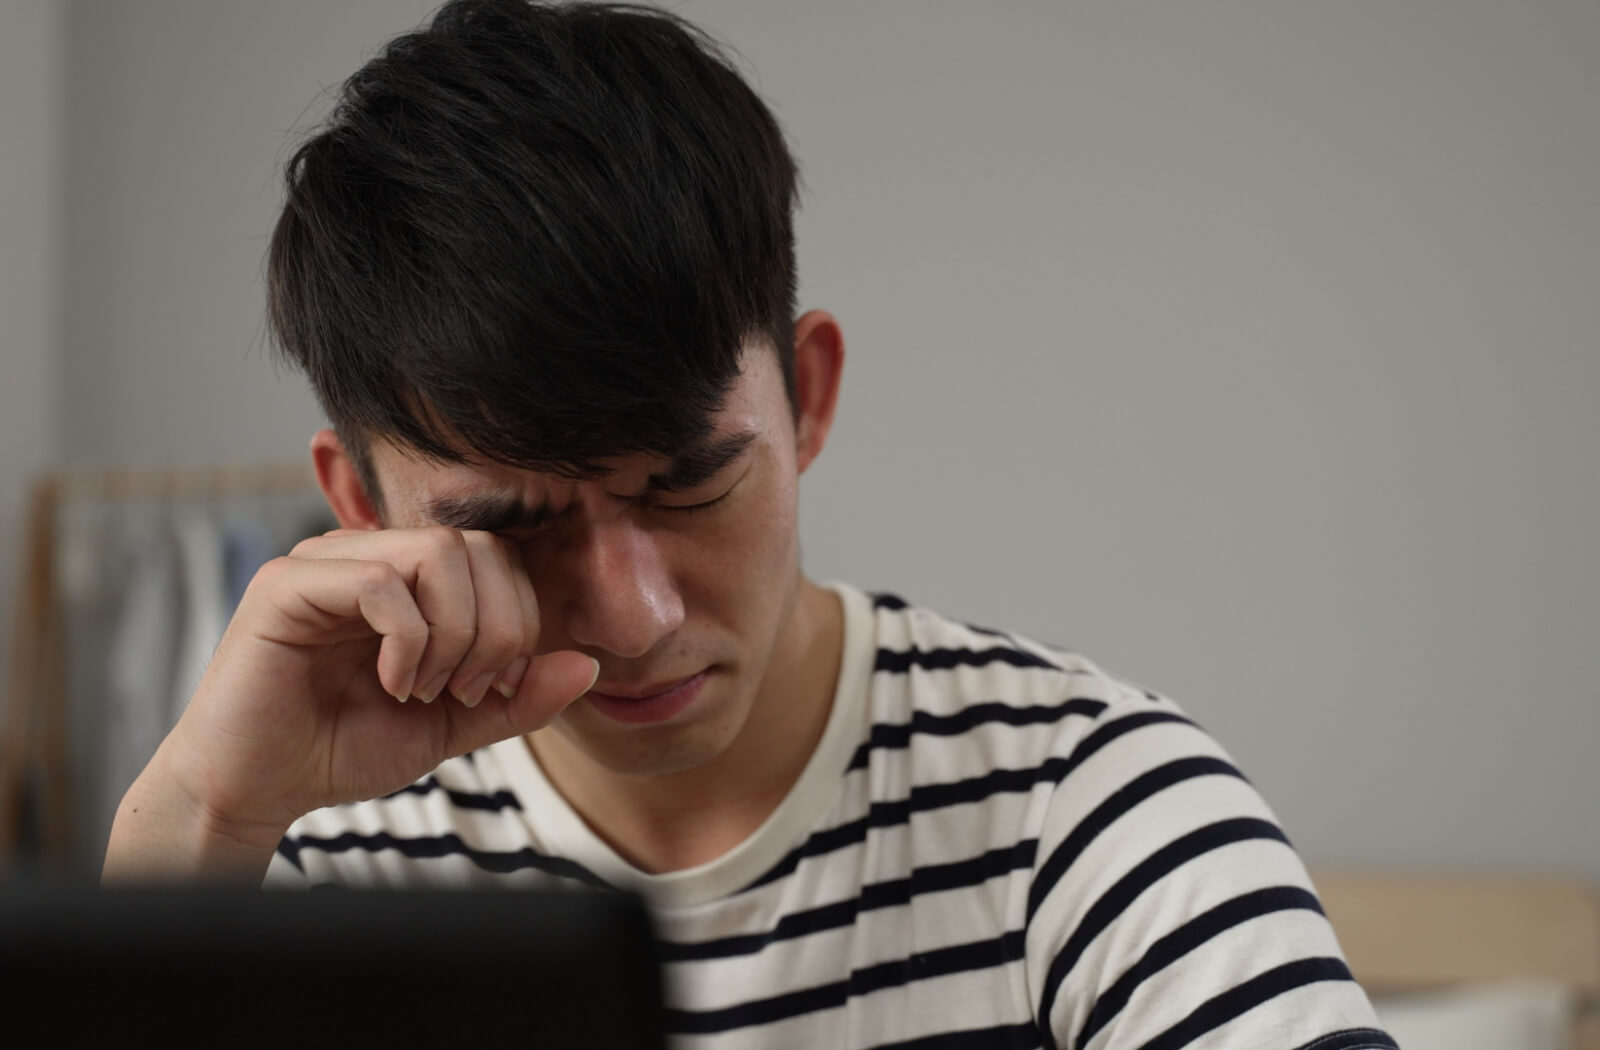 A young man sitting at a desk with his laptop as he rubs his eyes.